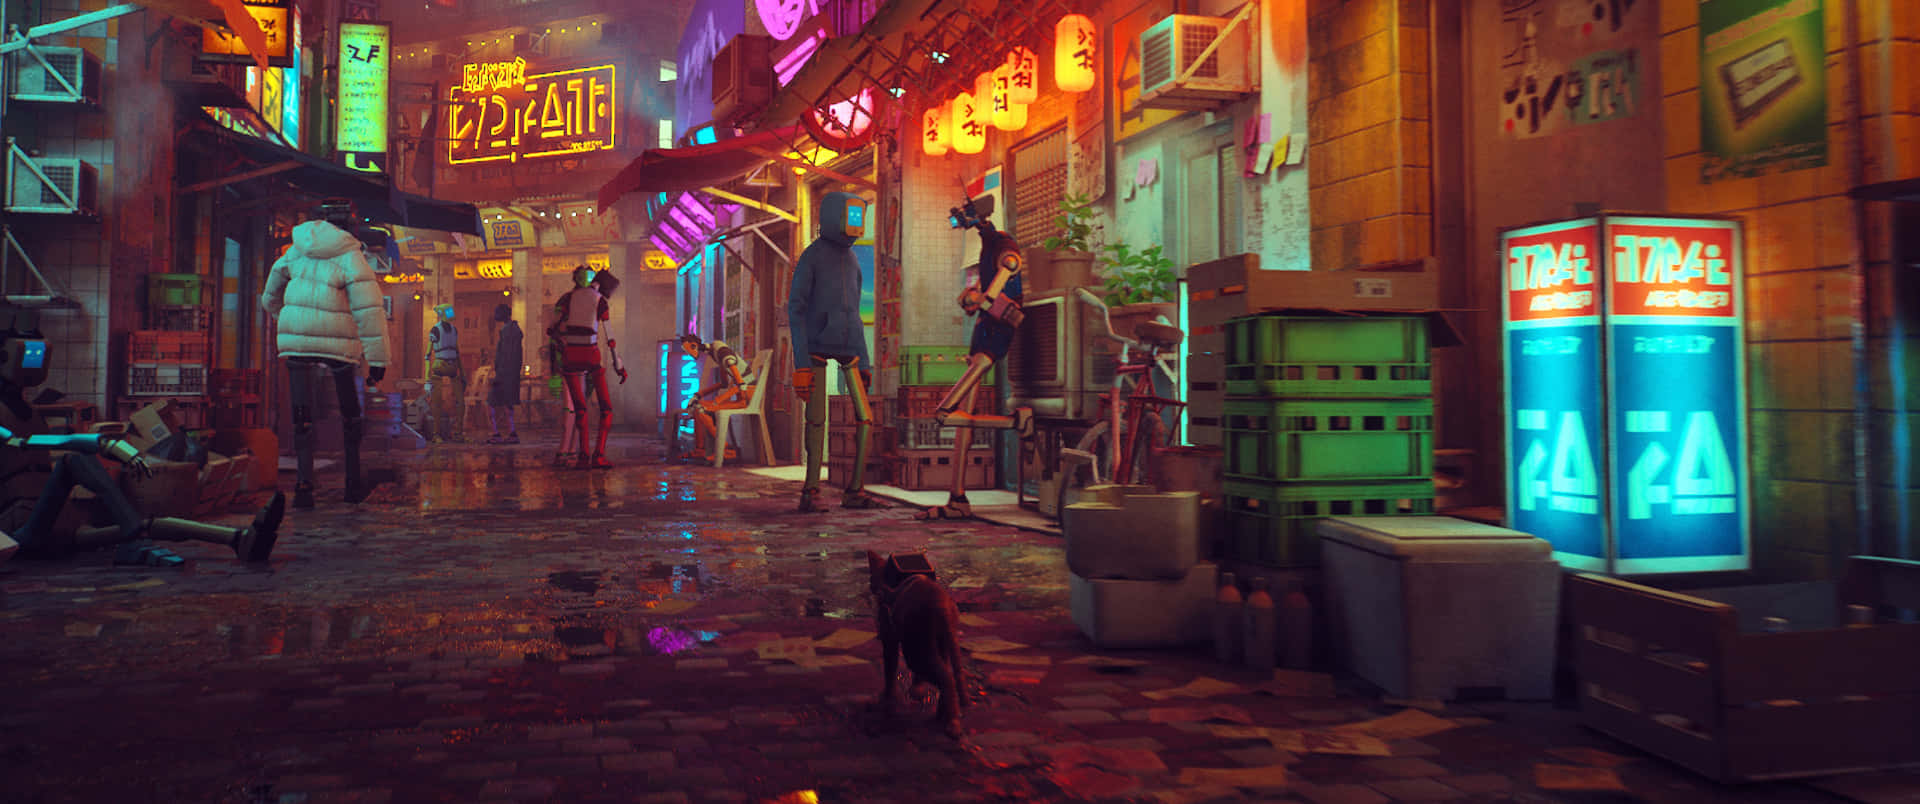 Explore the neon-drenched cityscape of Cyberpunk Wallpaper